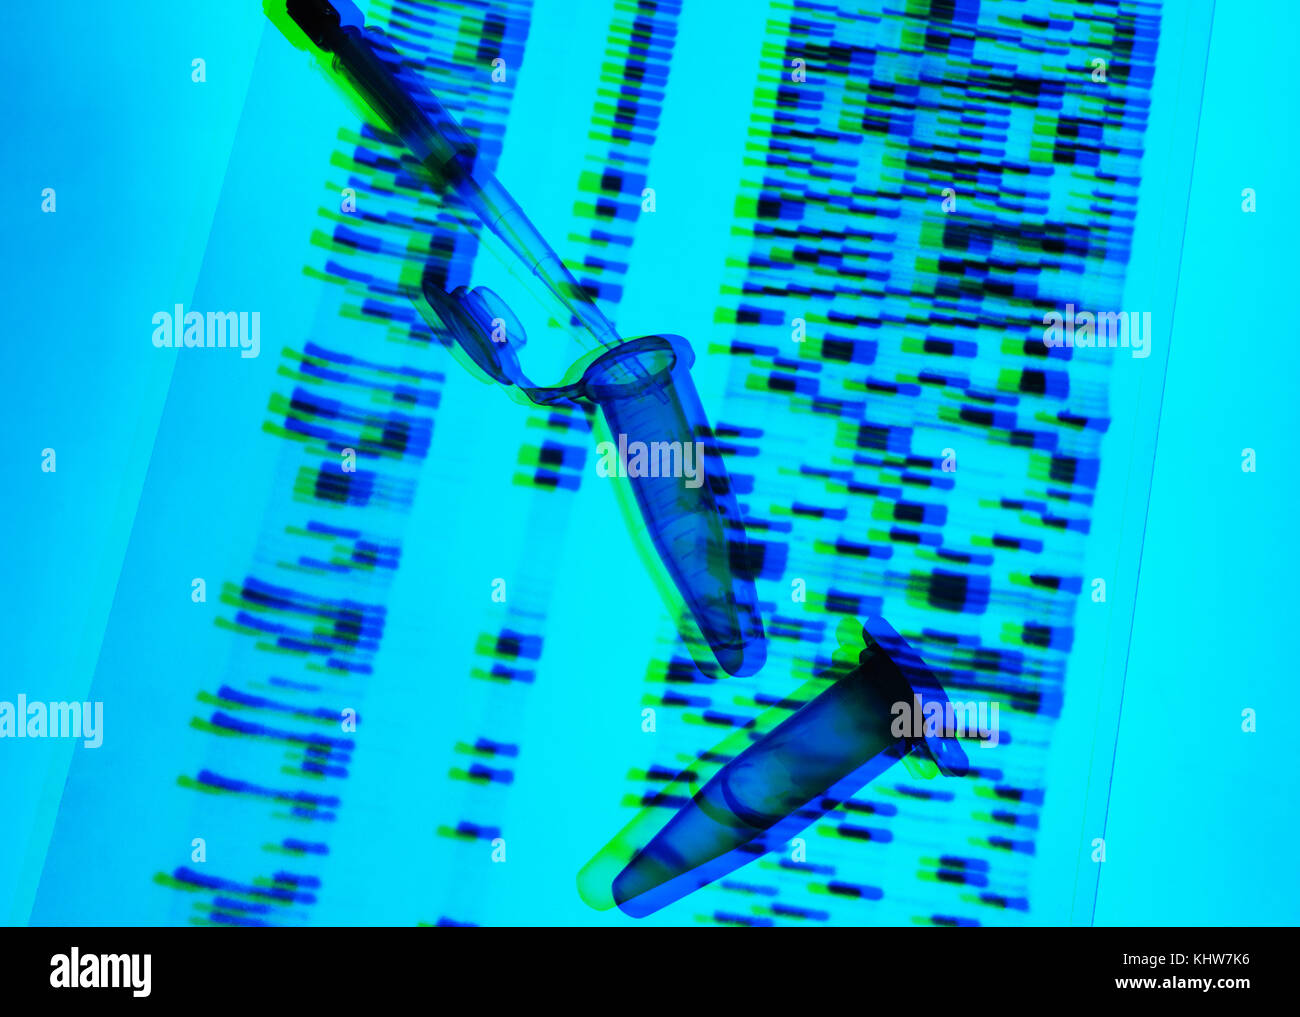 Genetic research, pipette and DNA samples on DNA autoradiogram illustrating research into life sciences and genetic modification Stock Photo